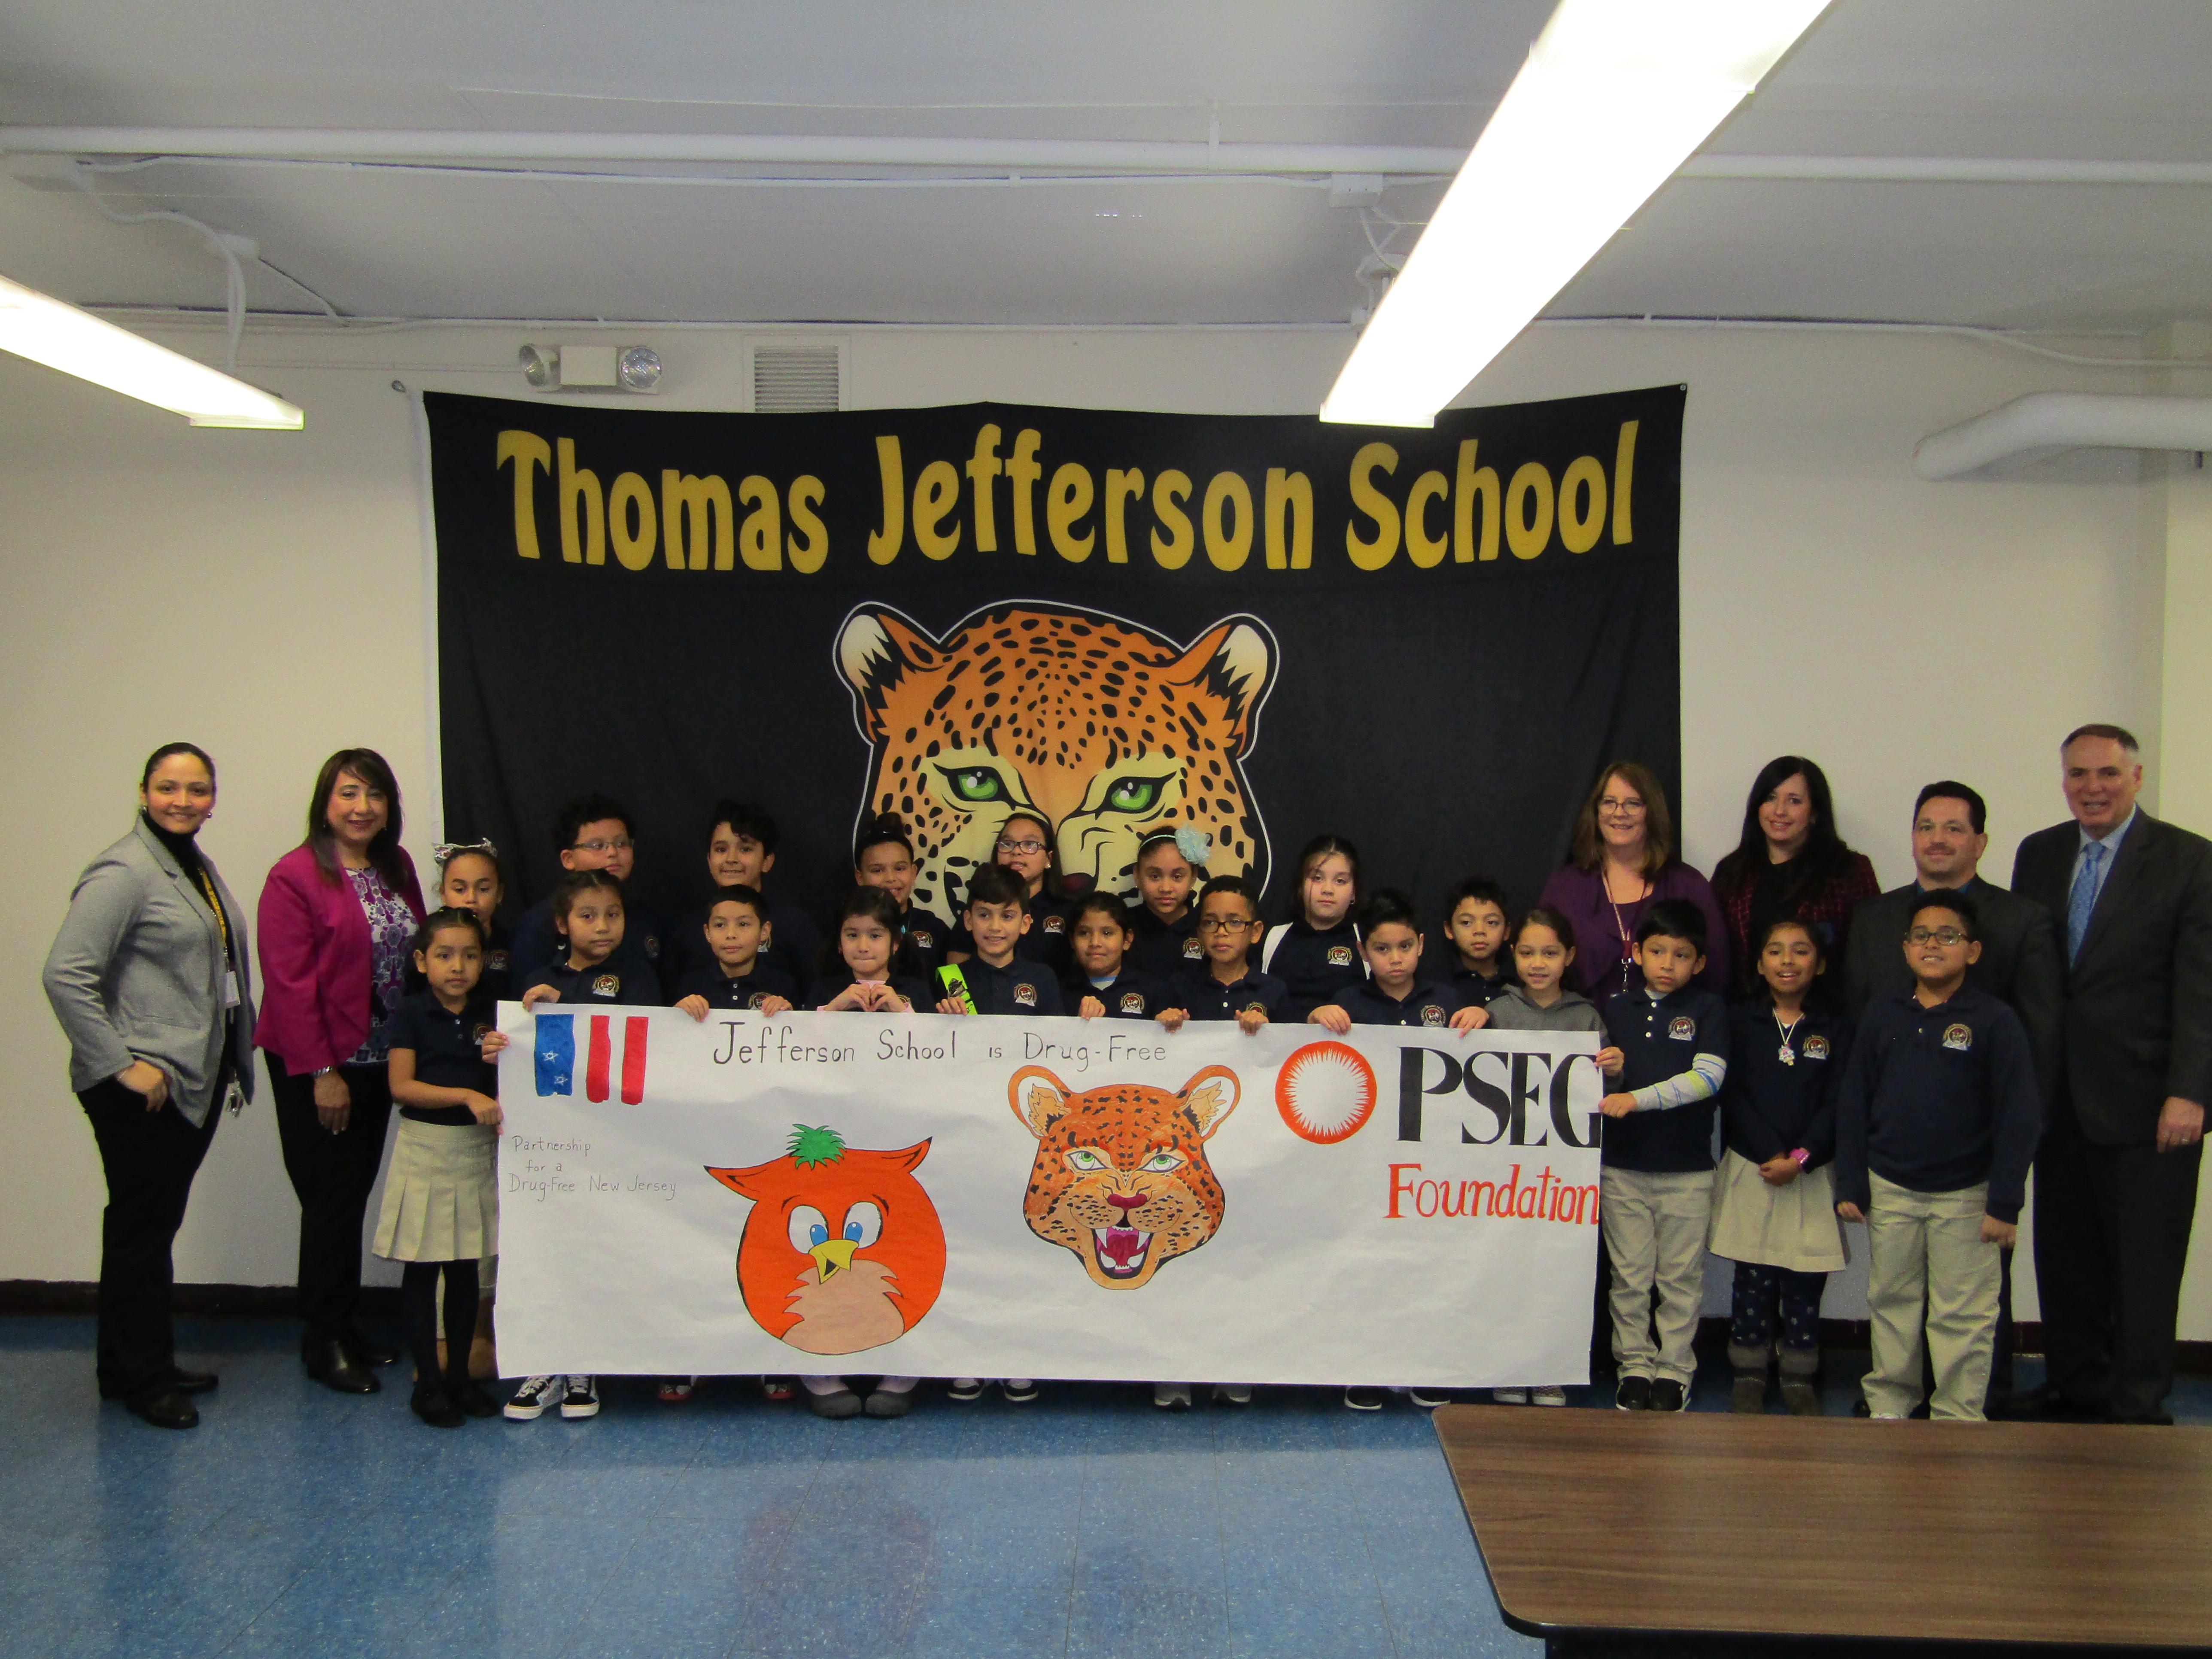 Group photo of students, teachers, Drug Free Representatives and Jefferson Administration